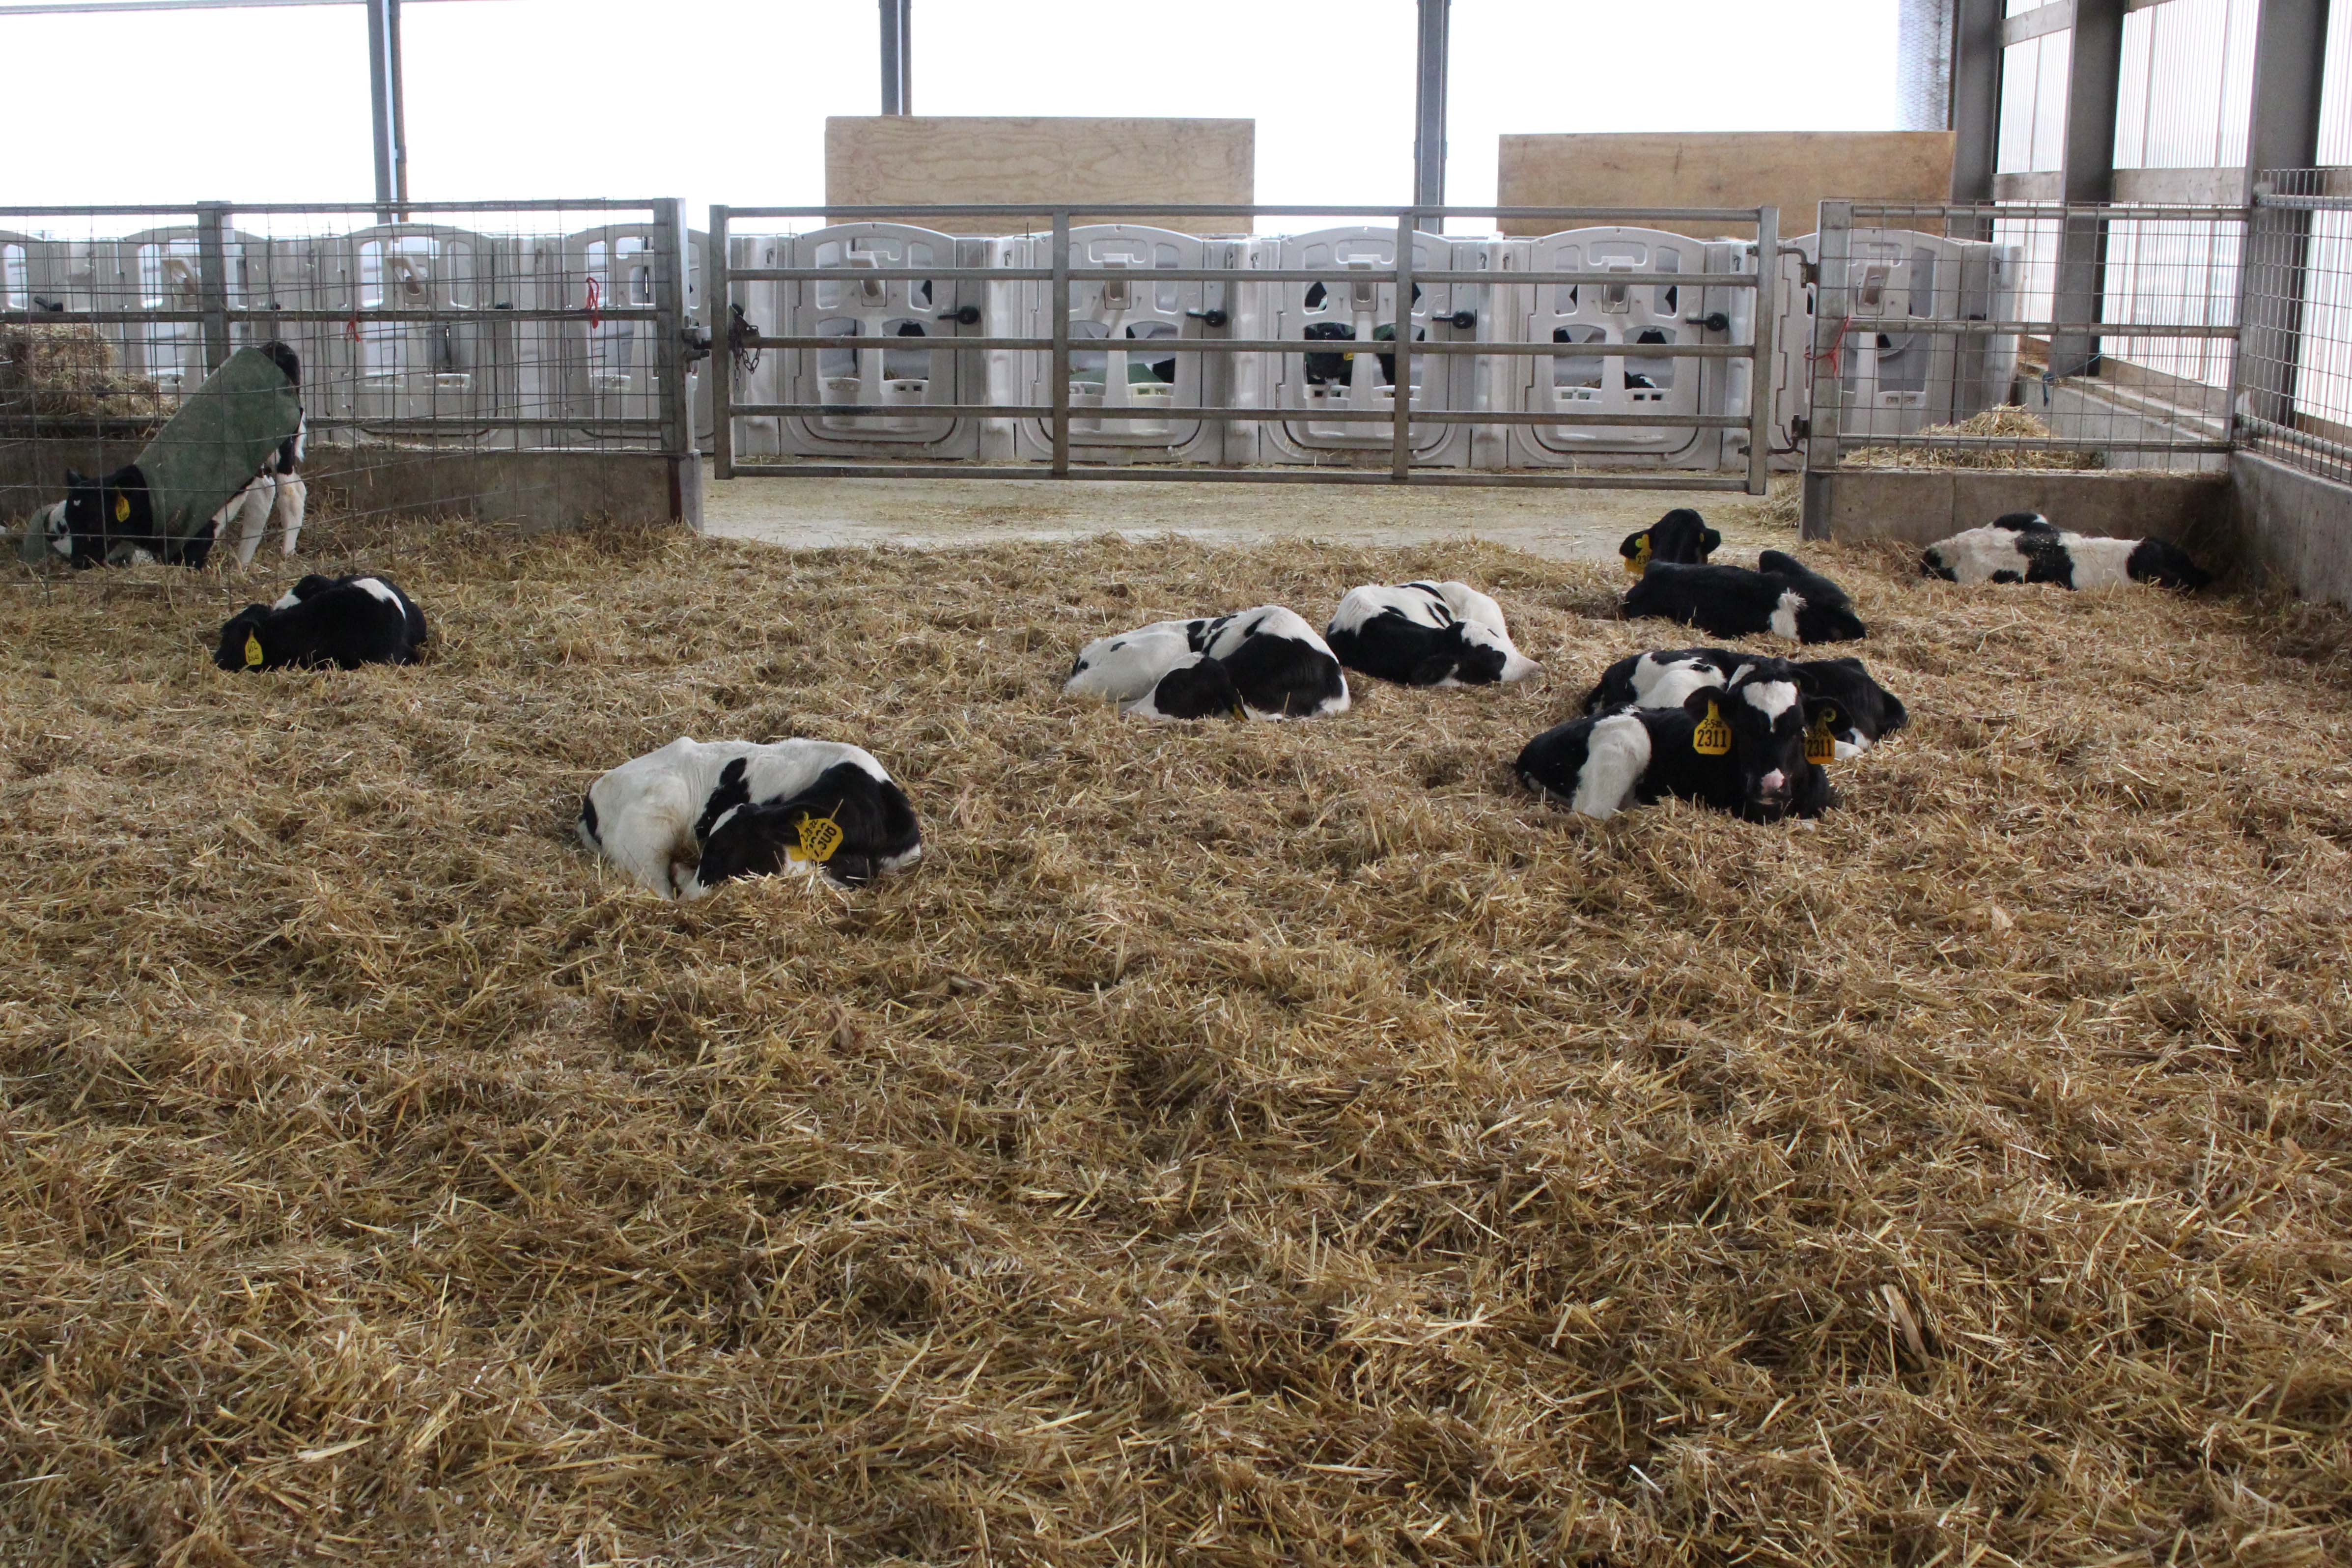 After backgrounding, calves are placed in this pen and it takes about two weeks to fill the pen. Soon after that, groups rotate up to their next pens and all pens are completely cleaned in between groups.